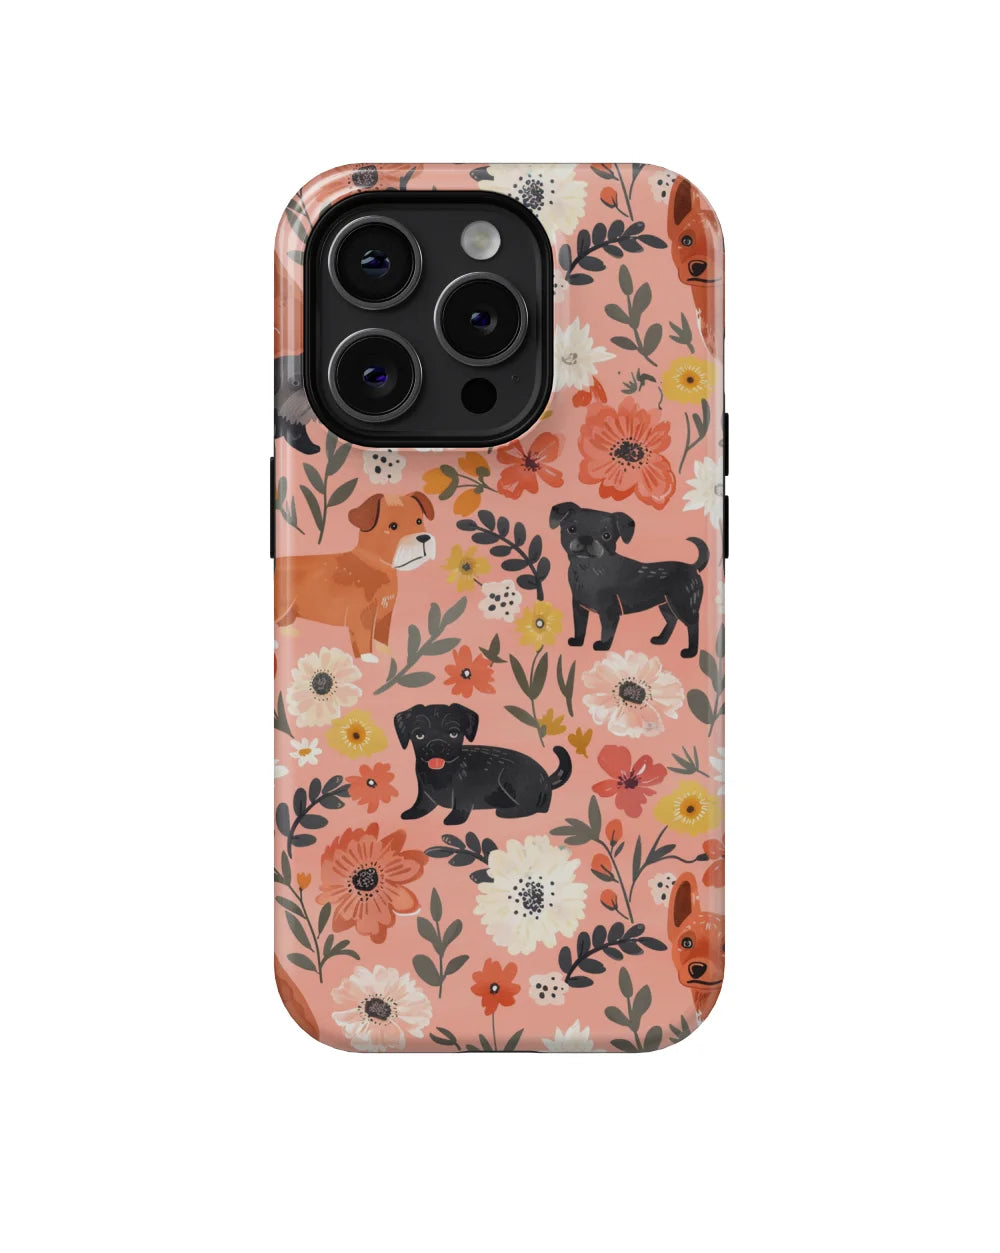 Floral Art Ⅱ: Flower and Dog Series Phone CaseFloral Art Ⅱ: Flower and Dog Series Phone Case